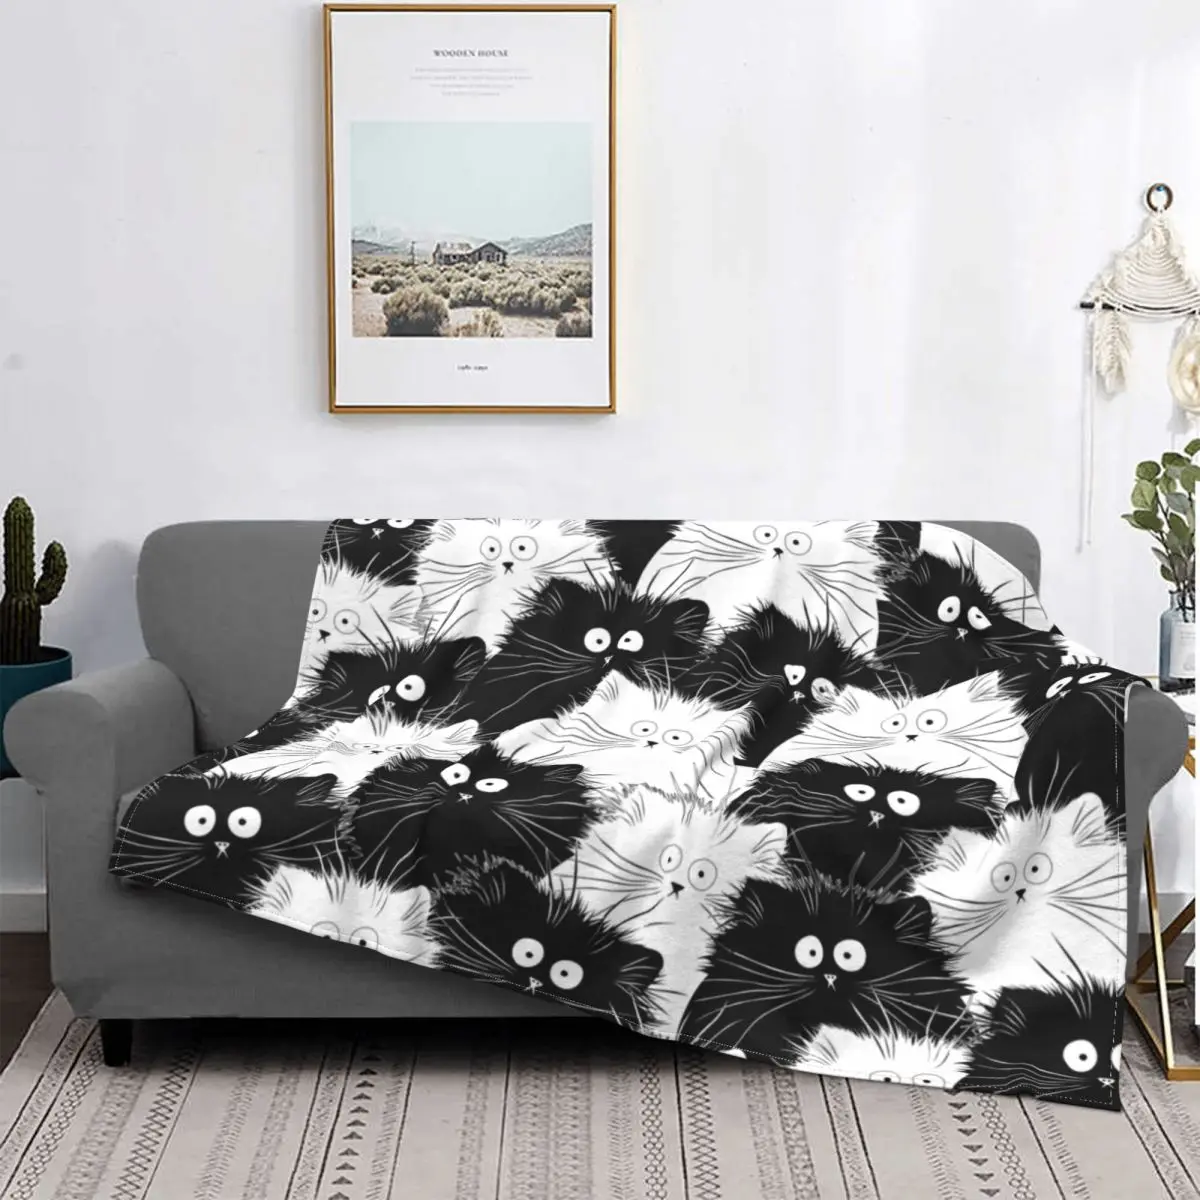 

Cute Cat Black White Pattern Blankets Flannel Winter Multifunction Super Soft Throw Blanket for Home Bedroom Bedding Throws